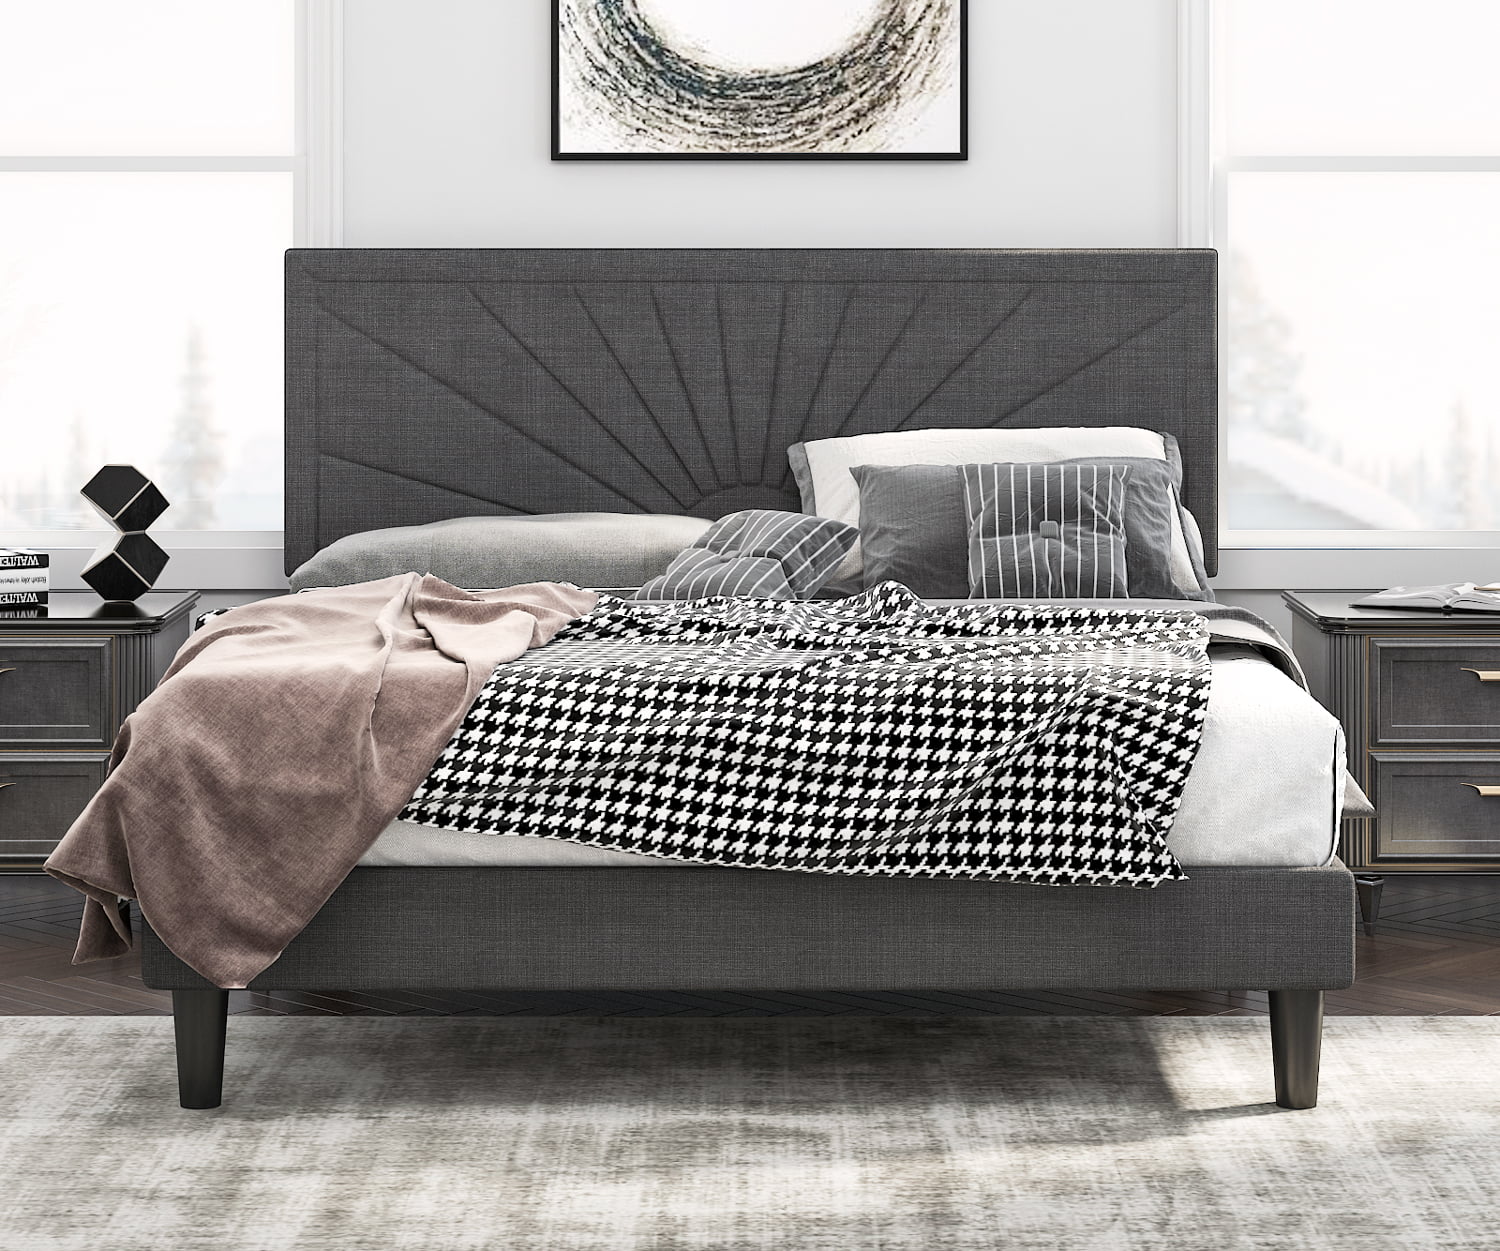 Upholstered Platform Bed Frame, Queen Gray Tufted Headboard And Footboard